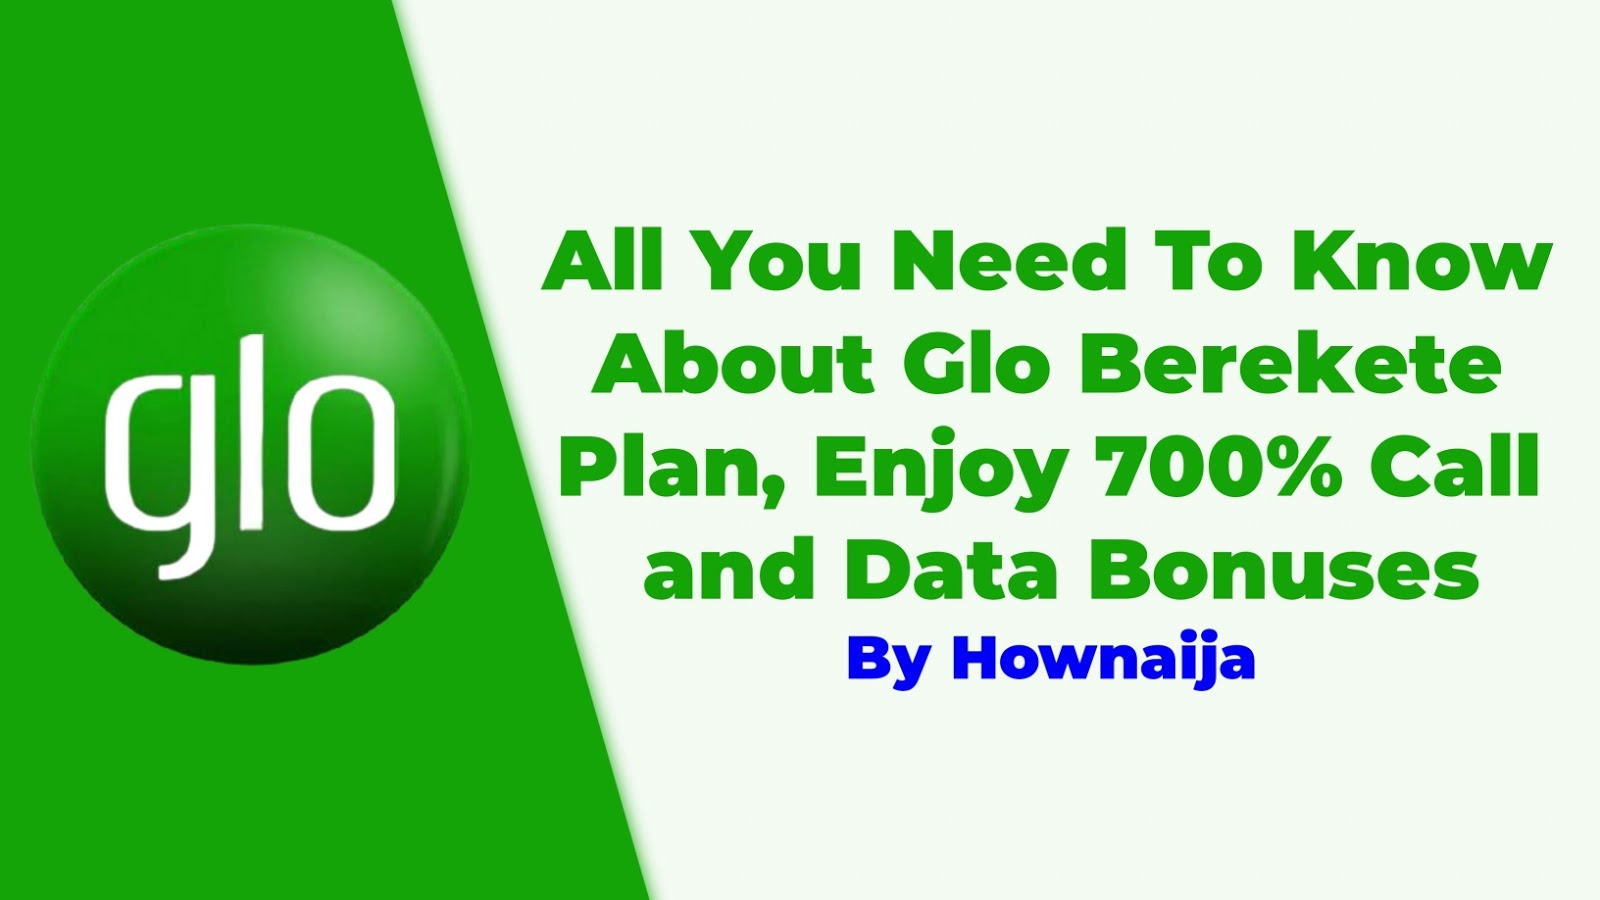 All You Need To Know About Glo Berekete Plan, Enjoy 700% Call and Data Bonuses